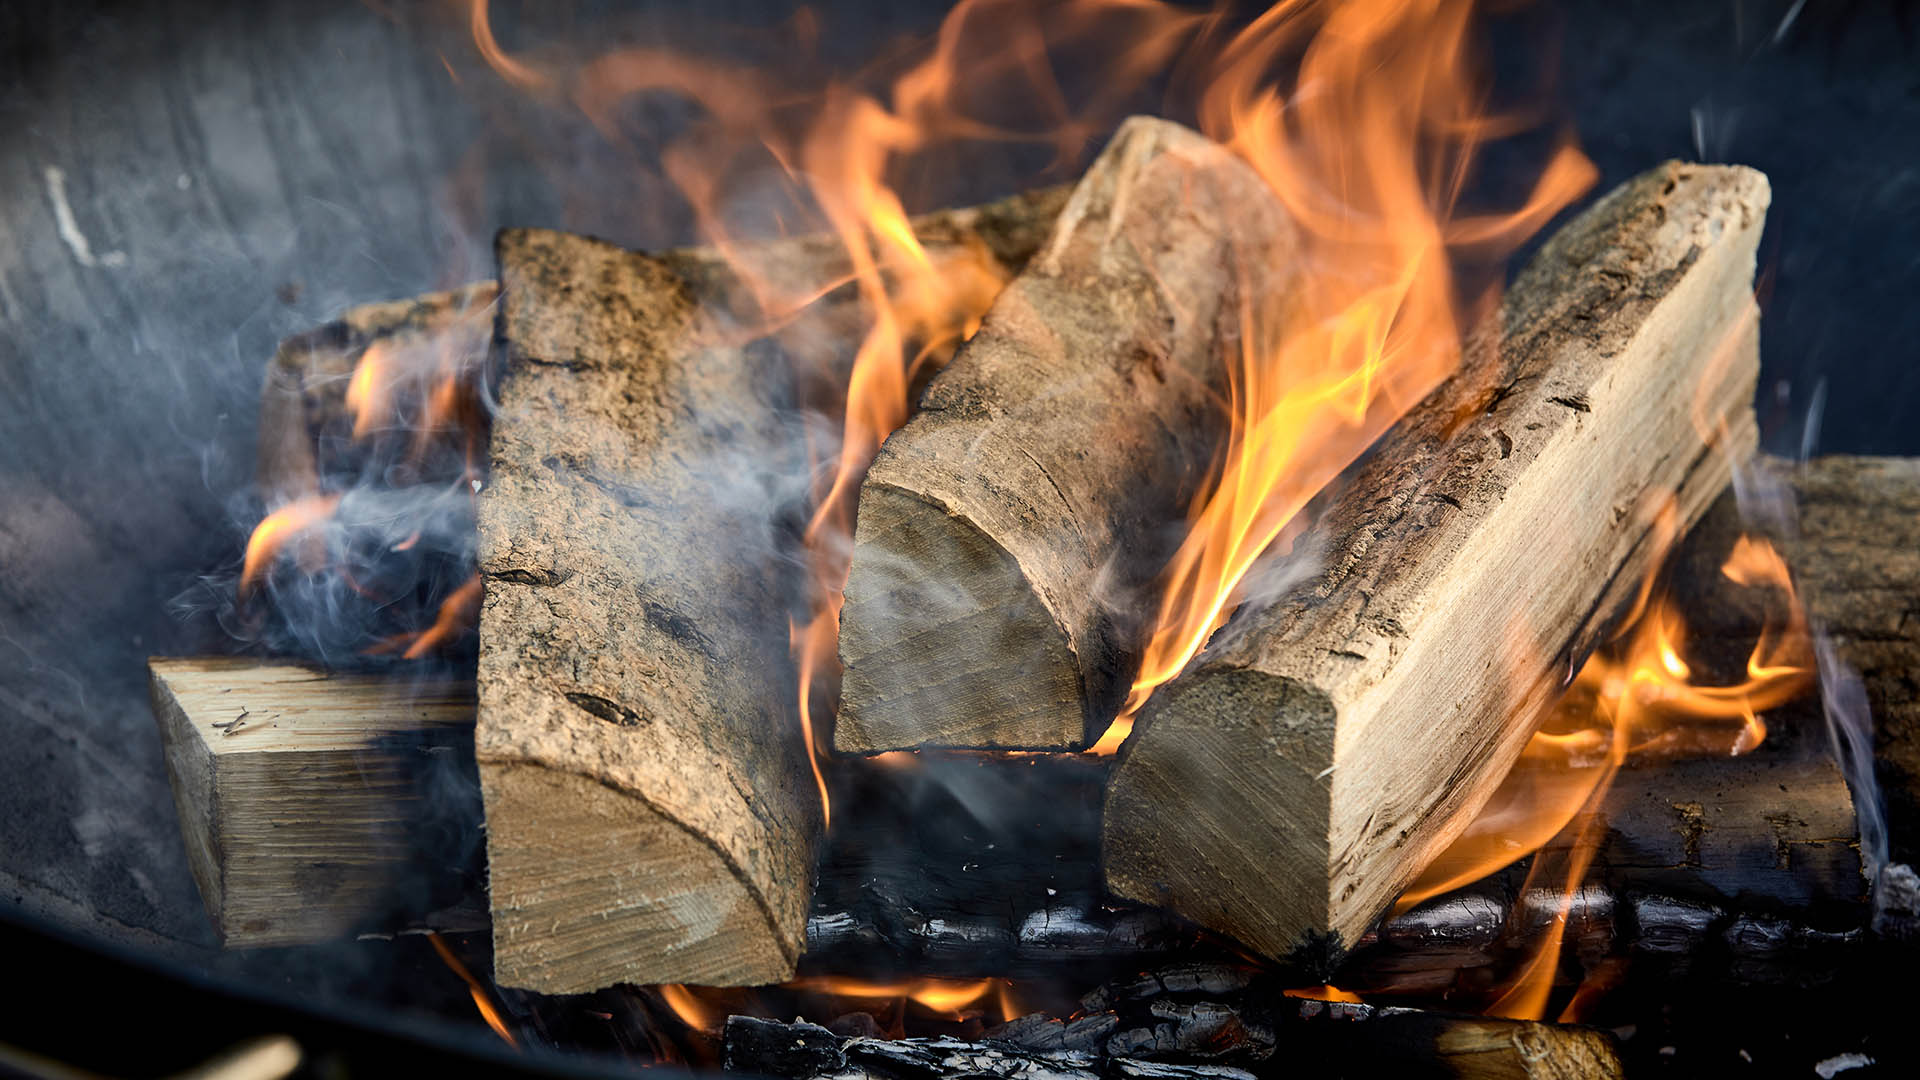 Logs in a campfire with flames.